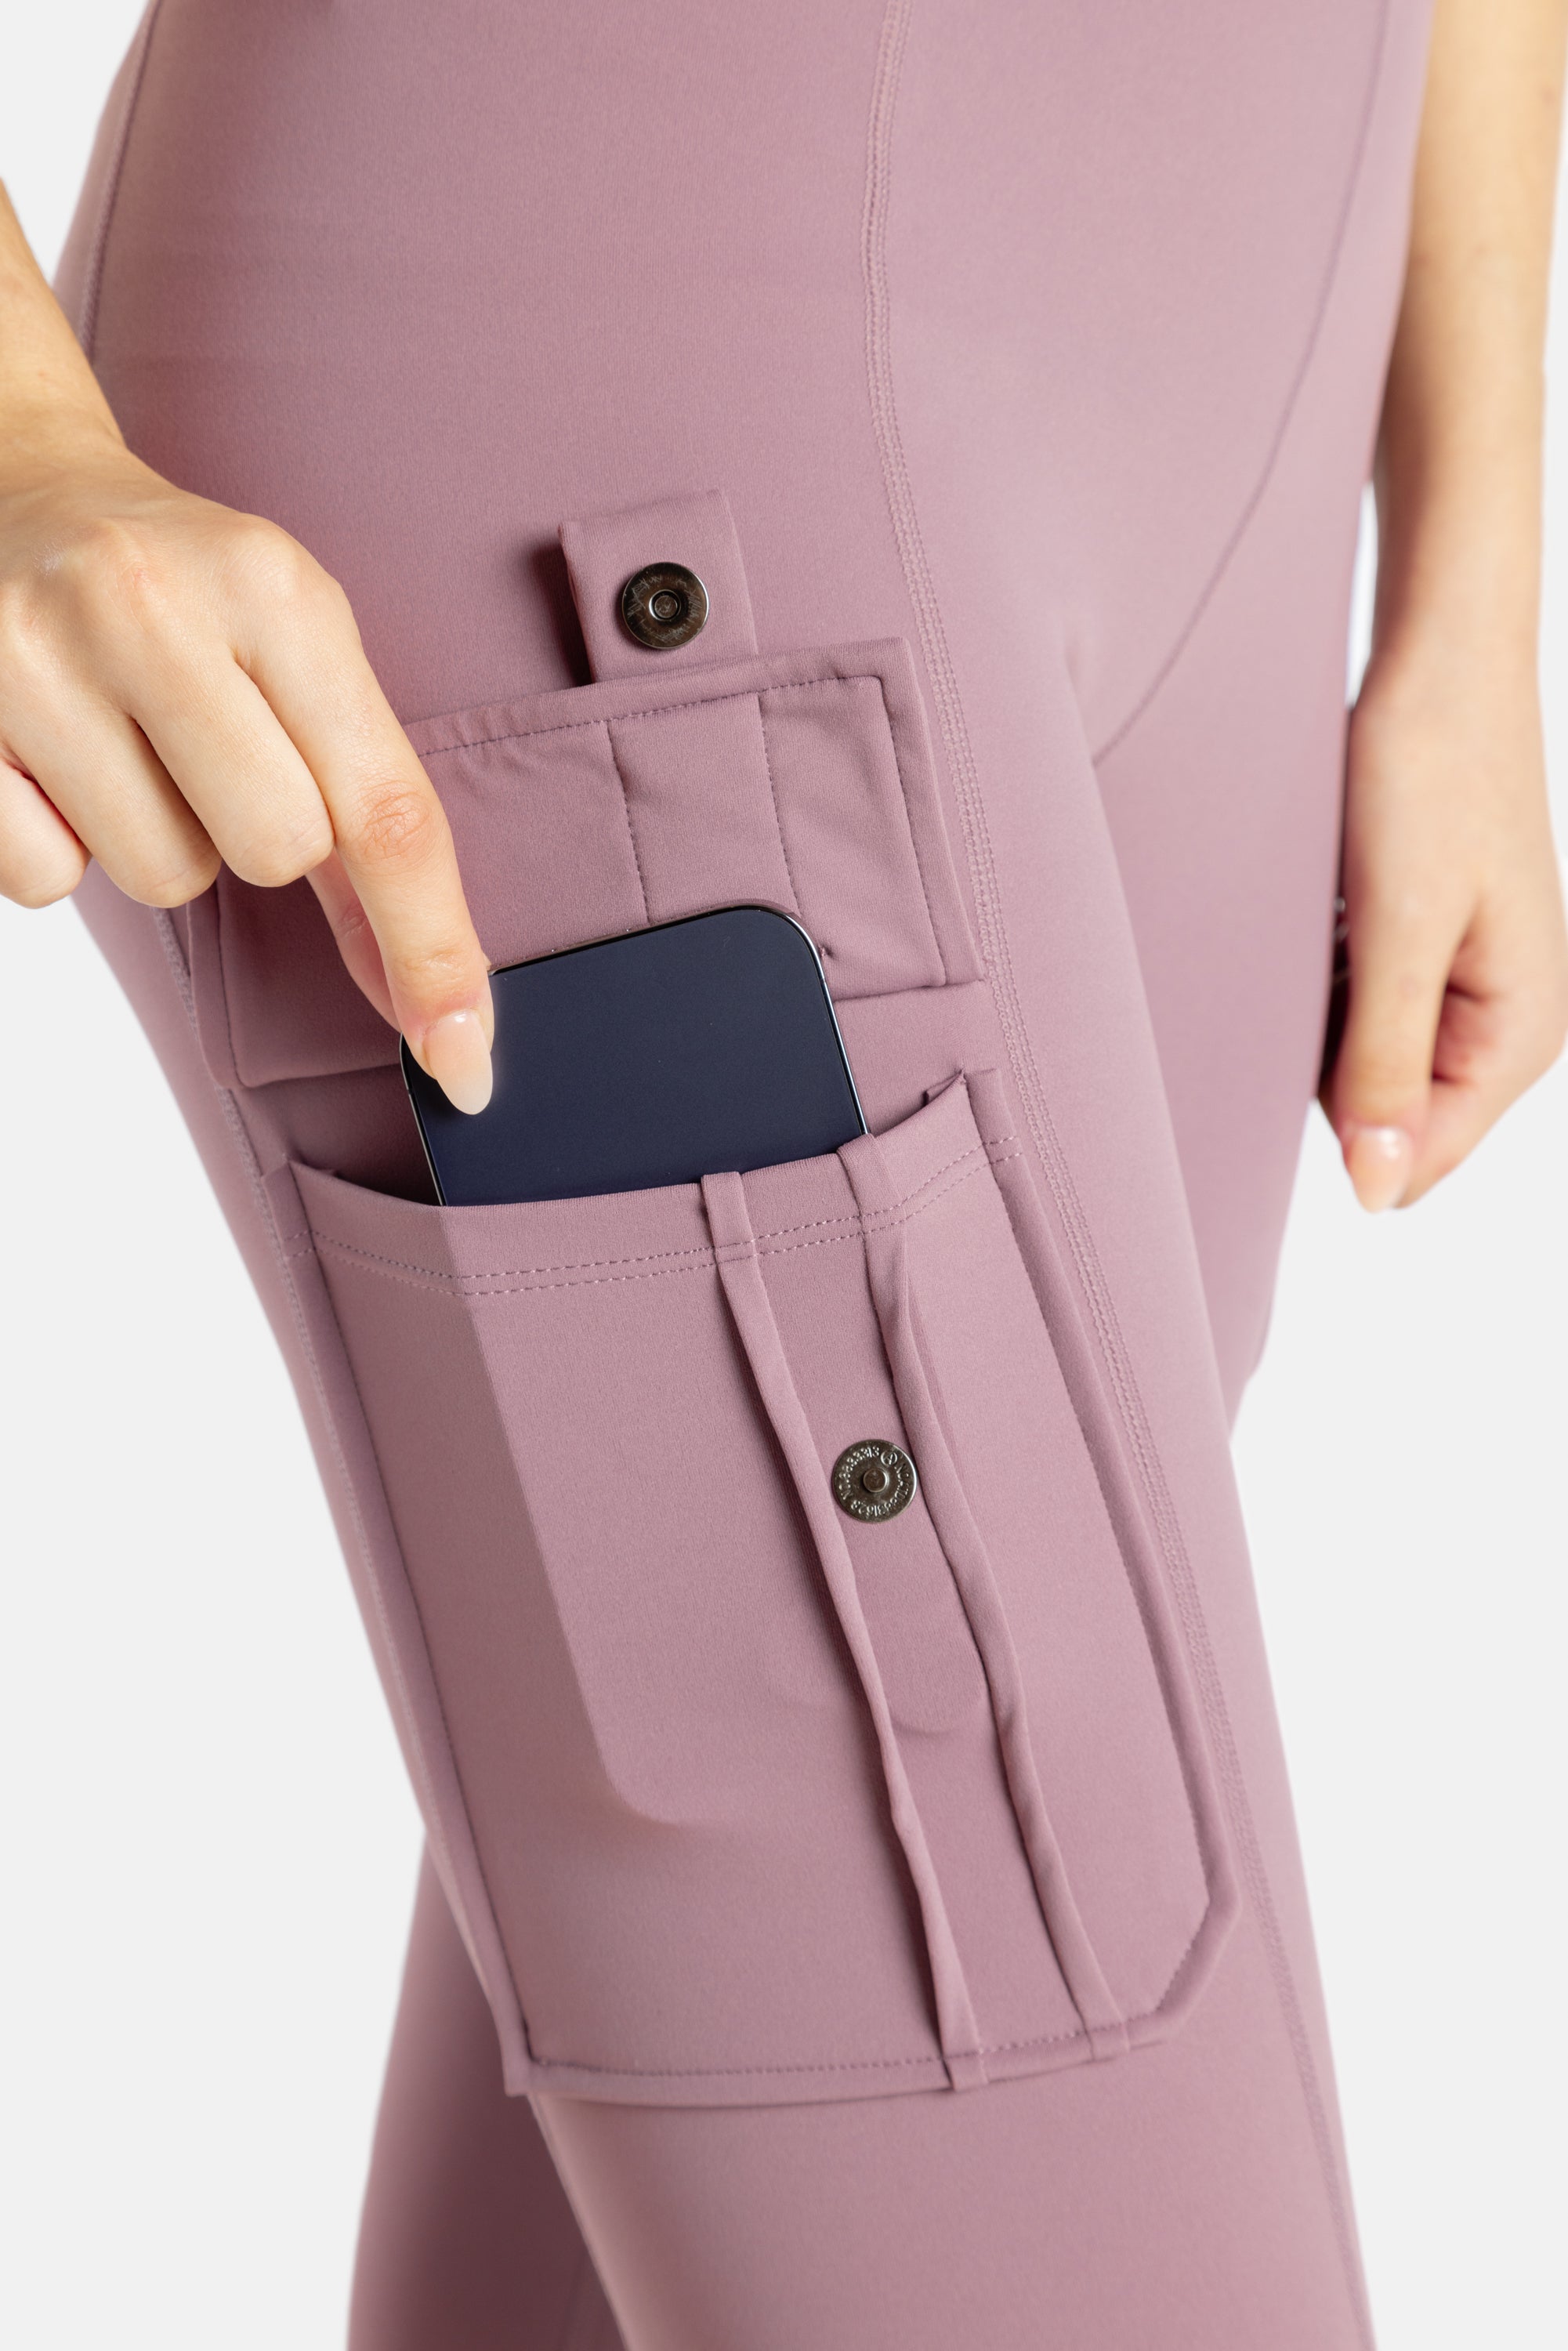 The close up of the pockets of the mauve (Pink-lavender) leggings. It's a buttoned pocket that you snap and your phone can fit.